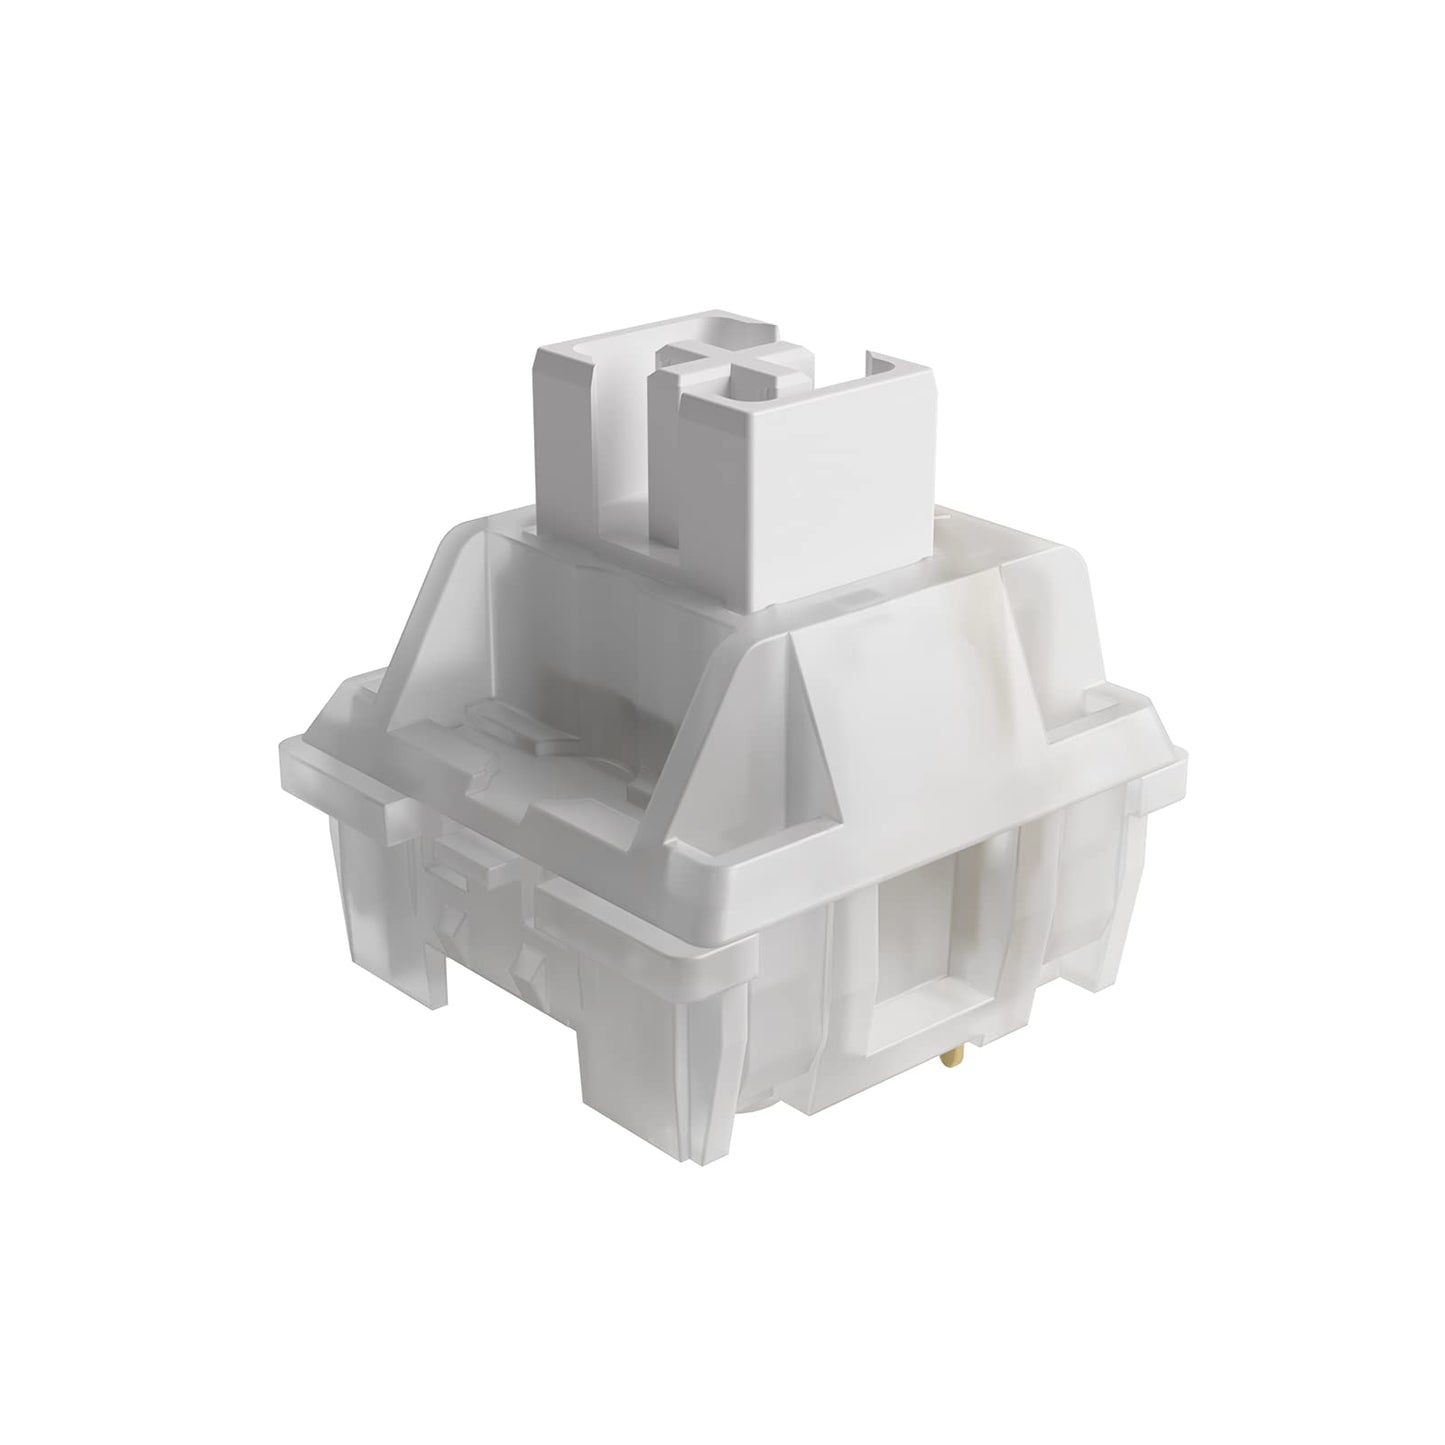 Akko CS Jelly White Switches (10pcs) 3 Pin 35gf Linear Switch Compatible for MX Mechanical Keyboard